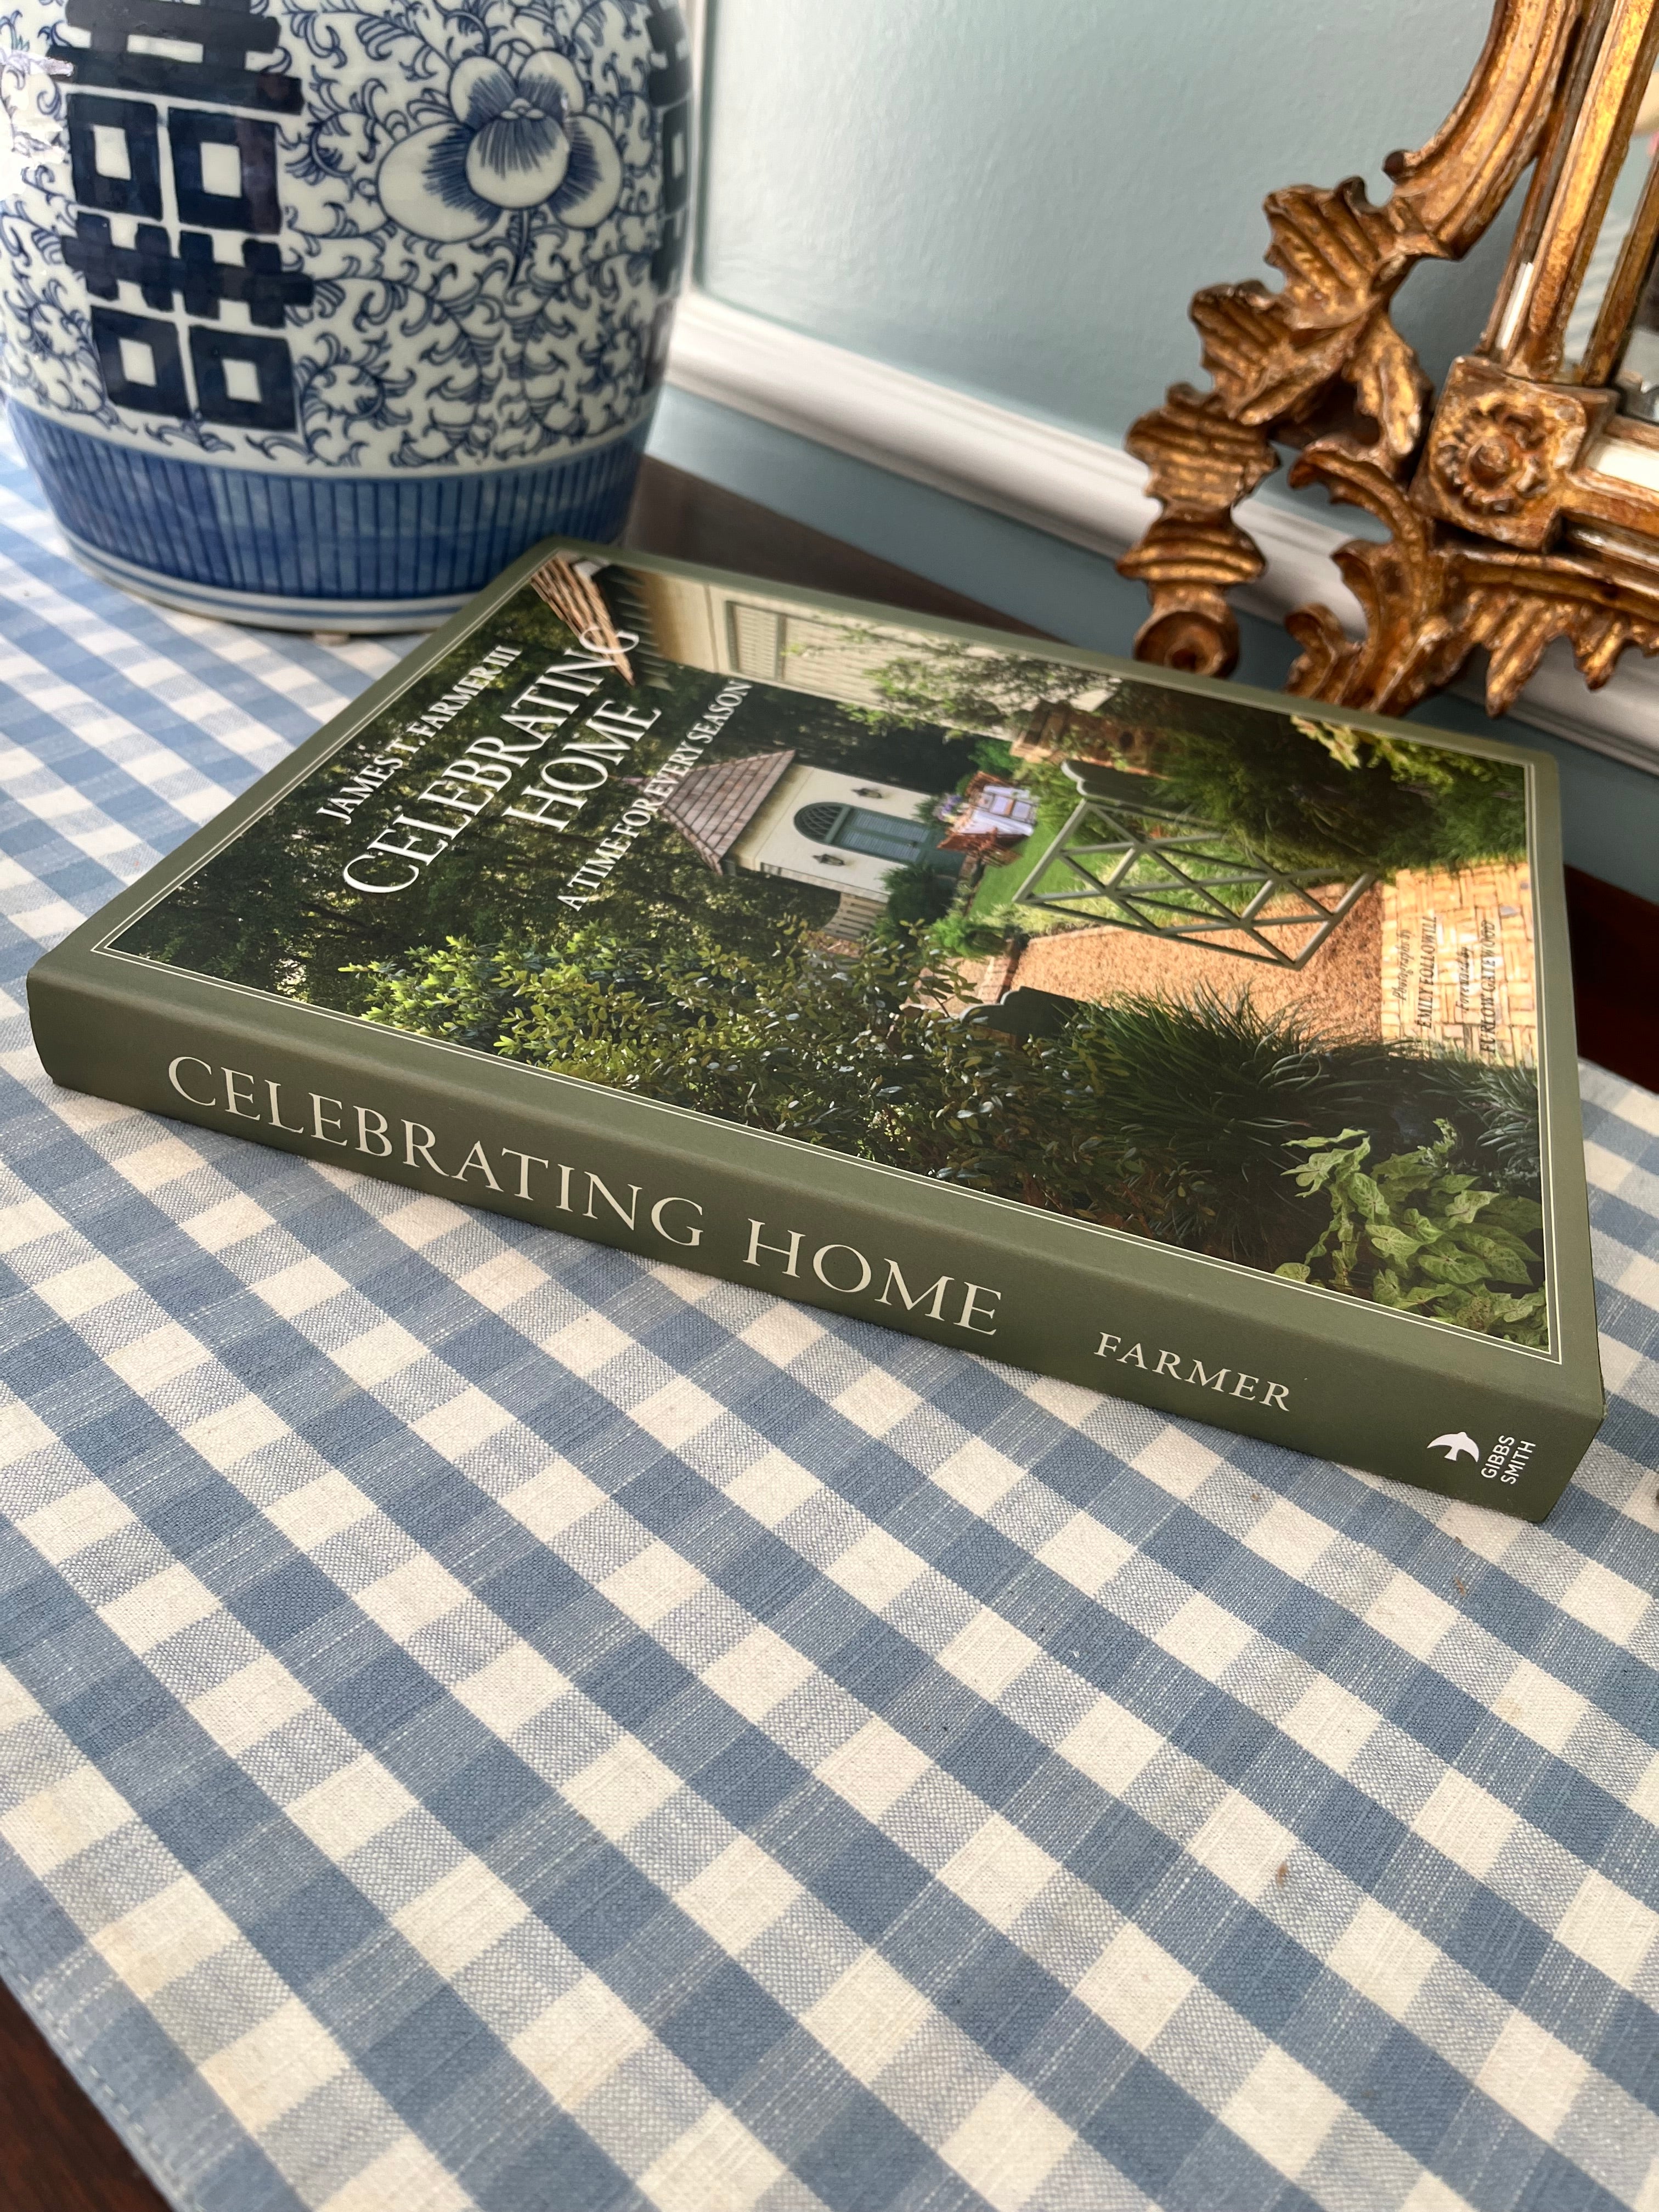 "Celebrating Home:  A Time for Every Season" by James T. Farmer